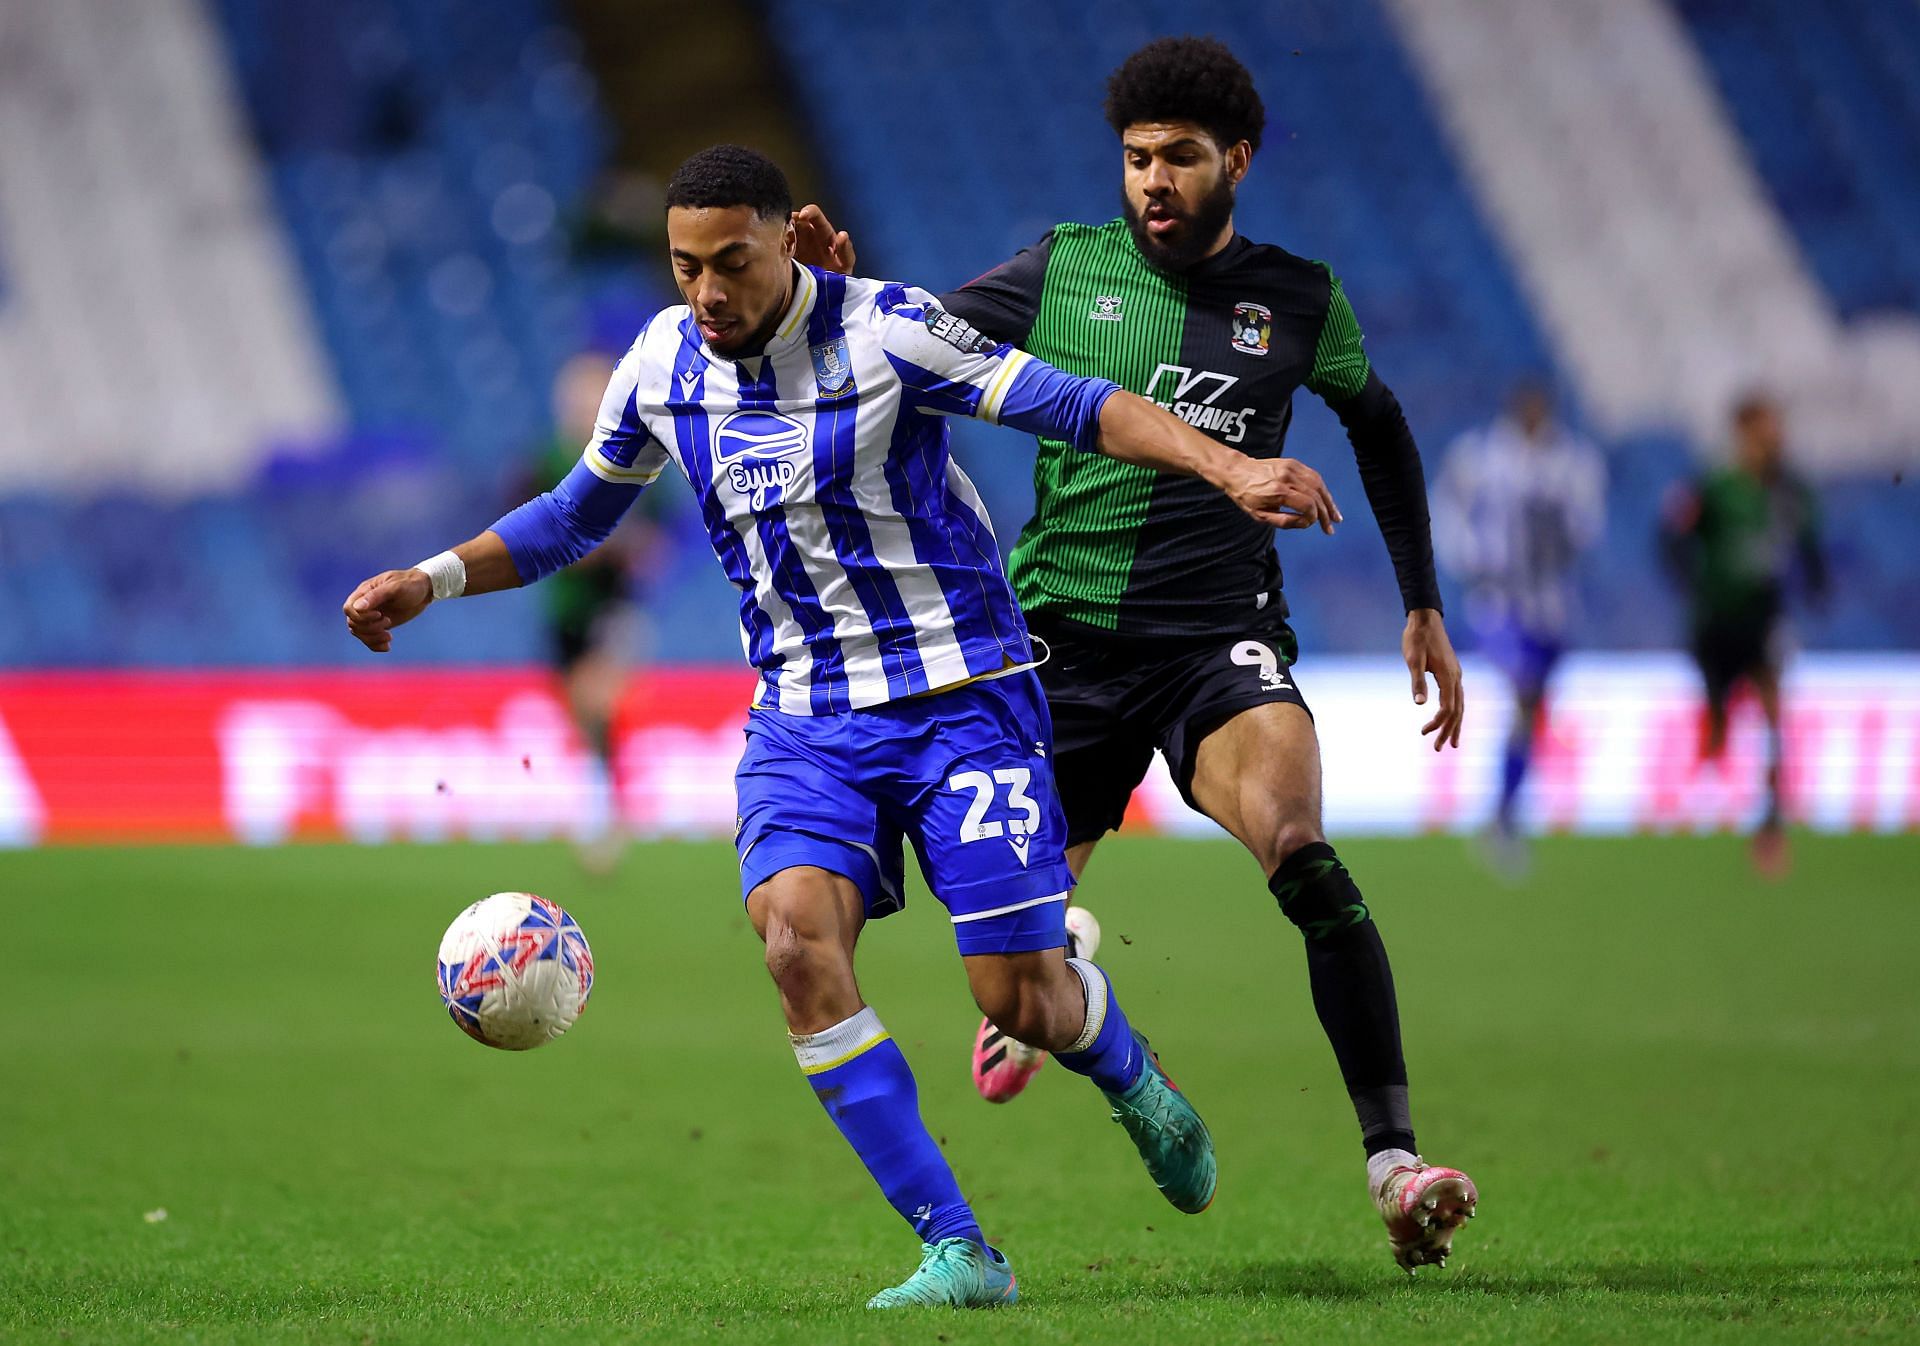 Sheffield Wednesday v Coventry City - Emirates FA Cup Fourth Round